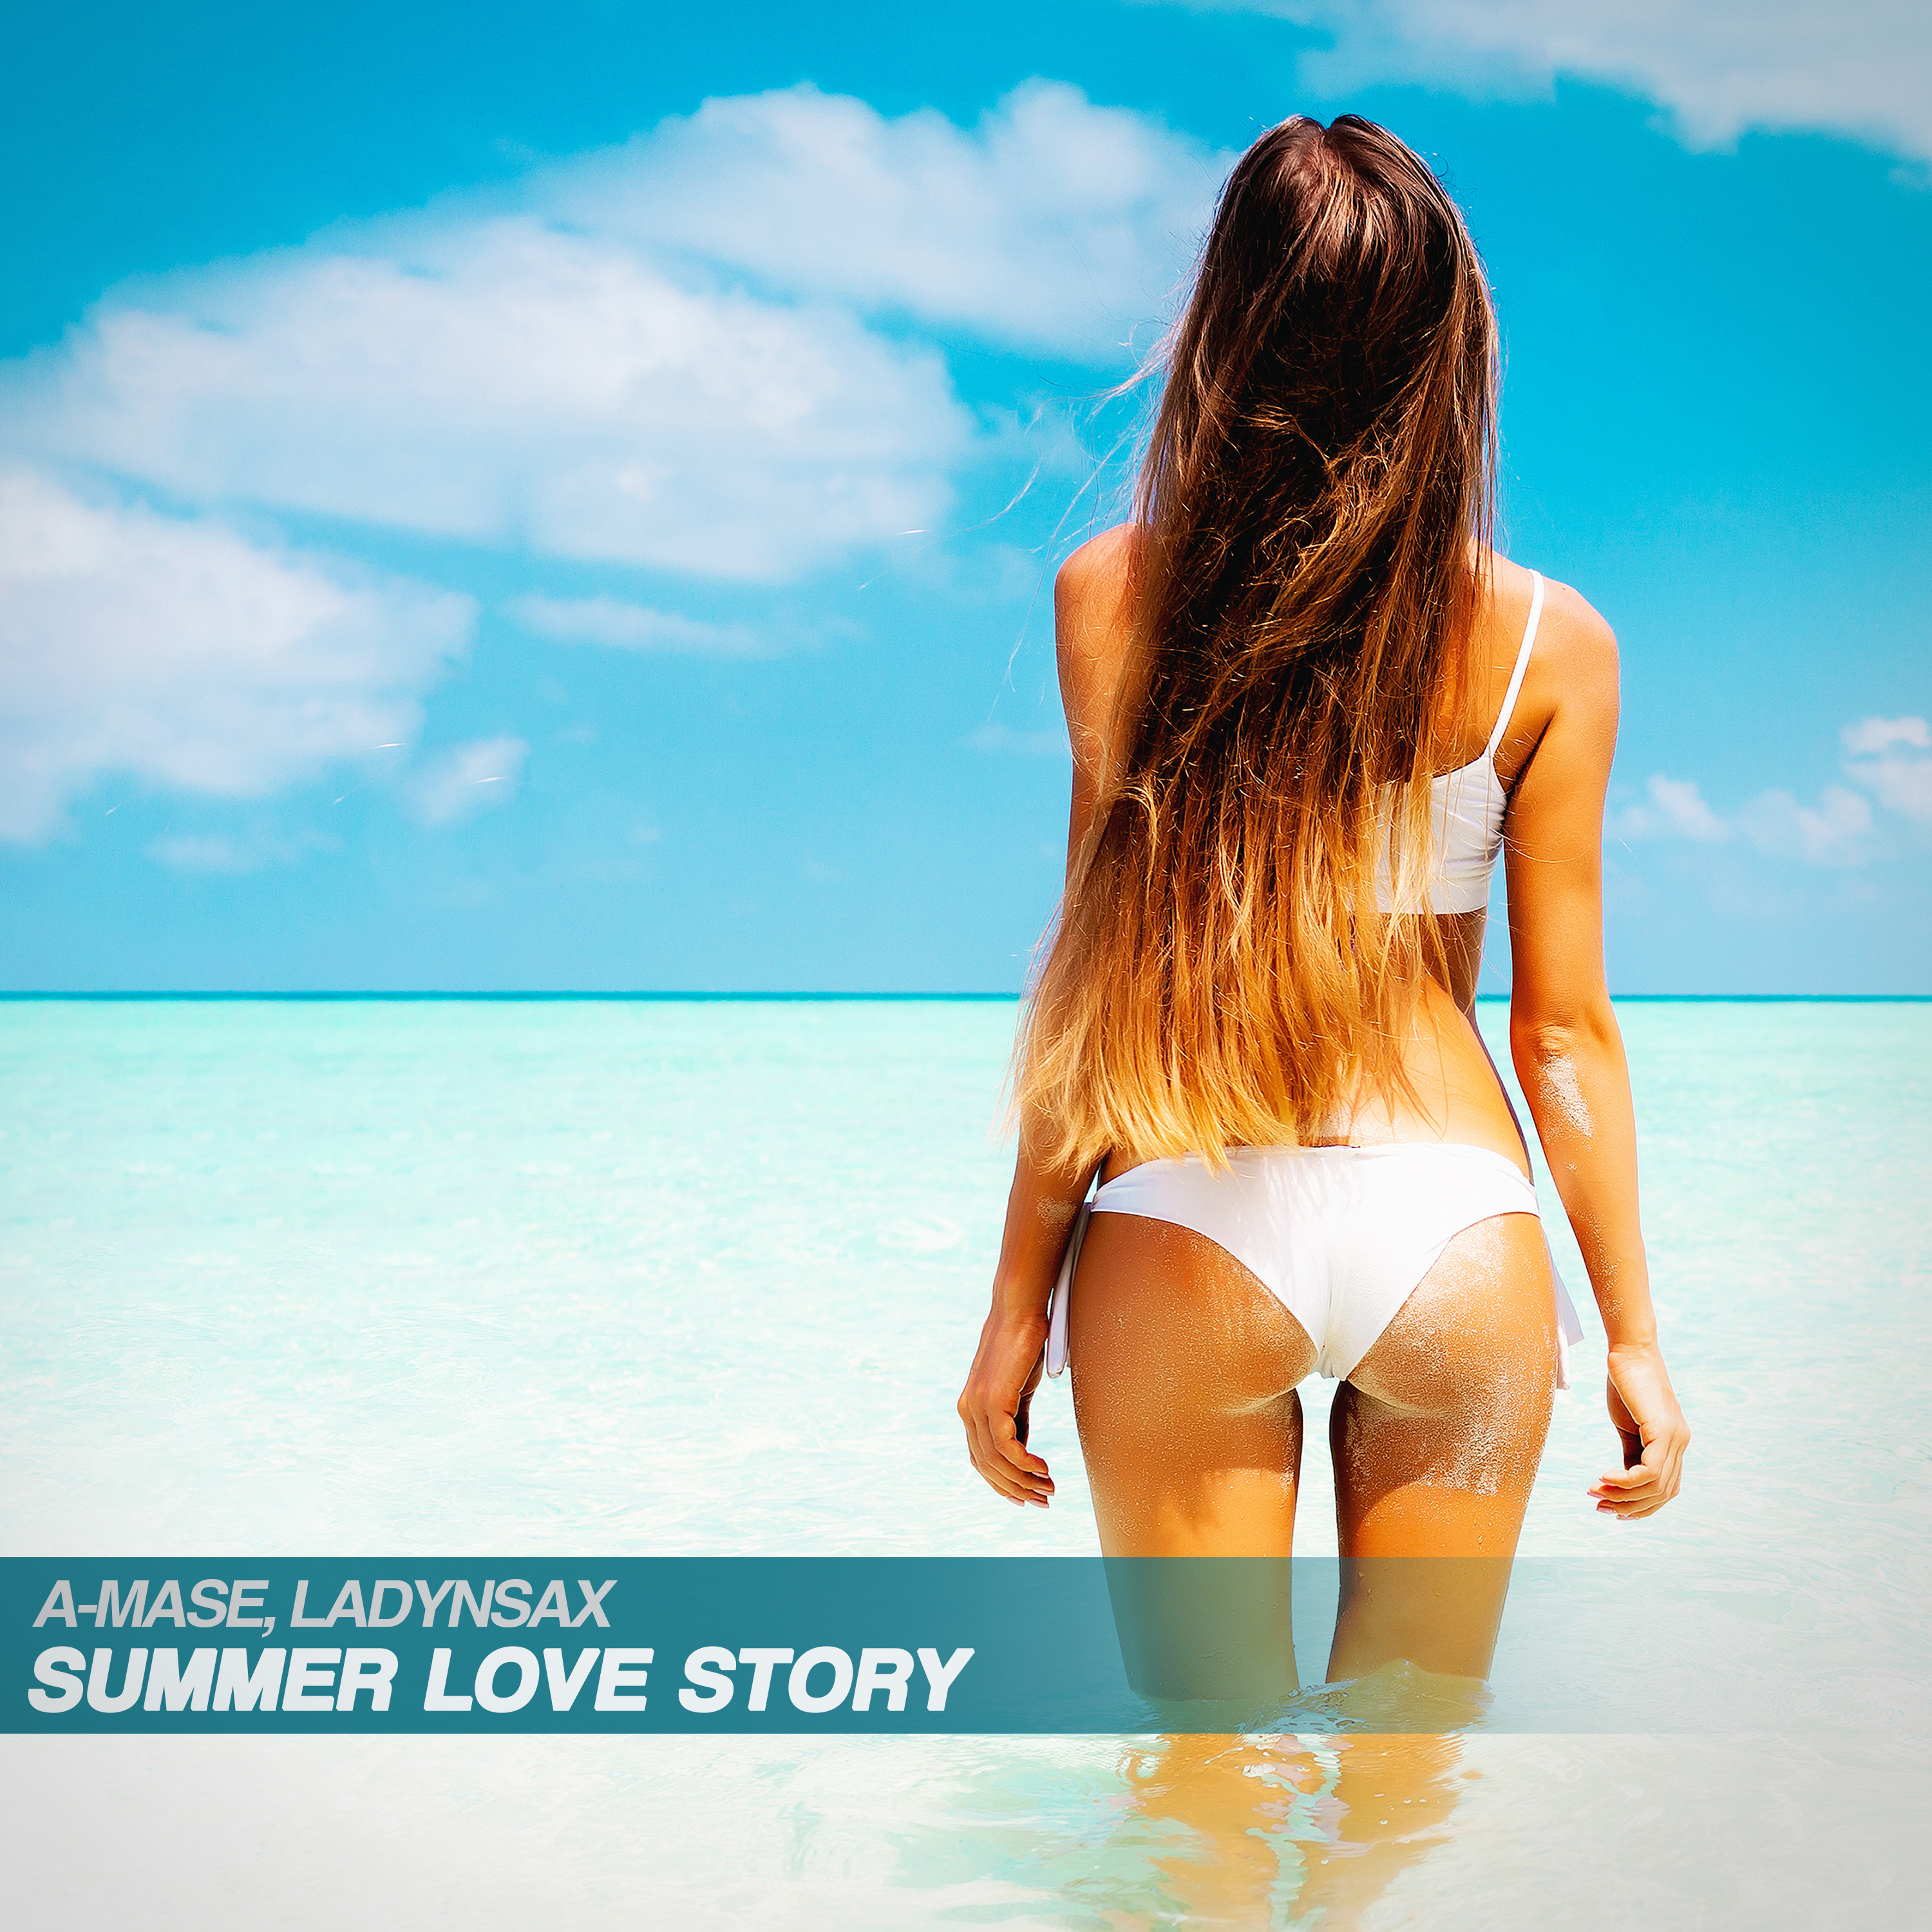 A-mase summer love story